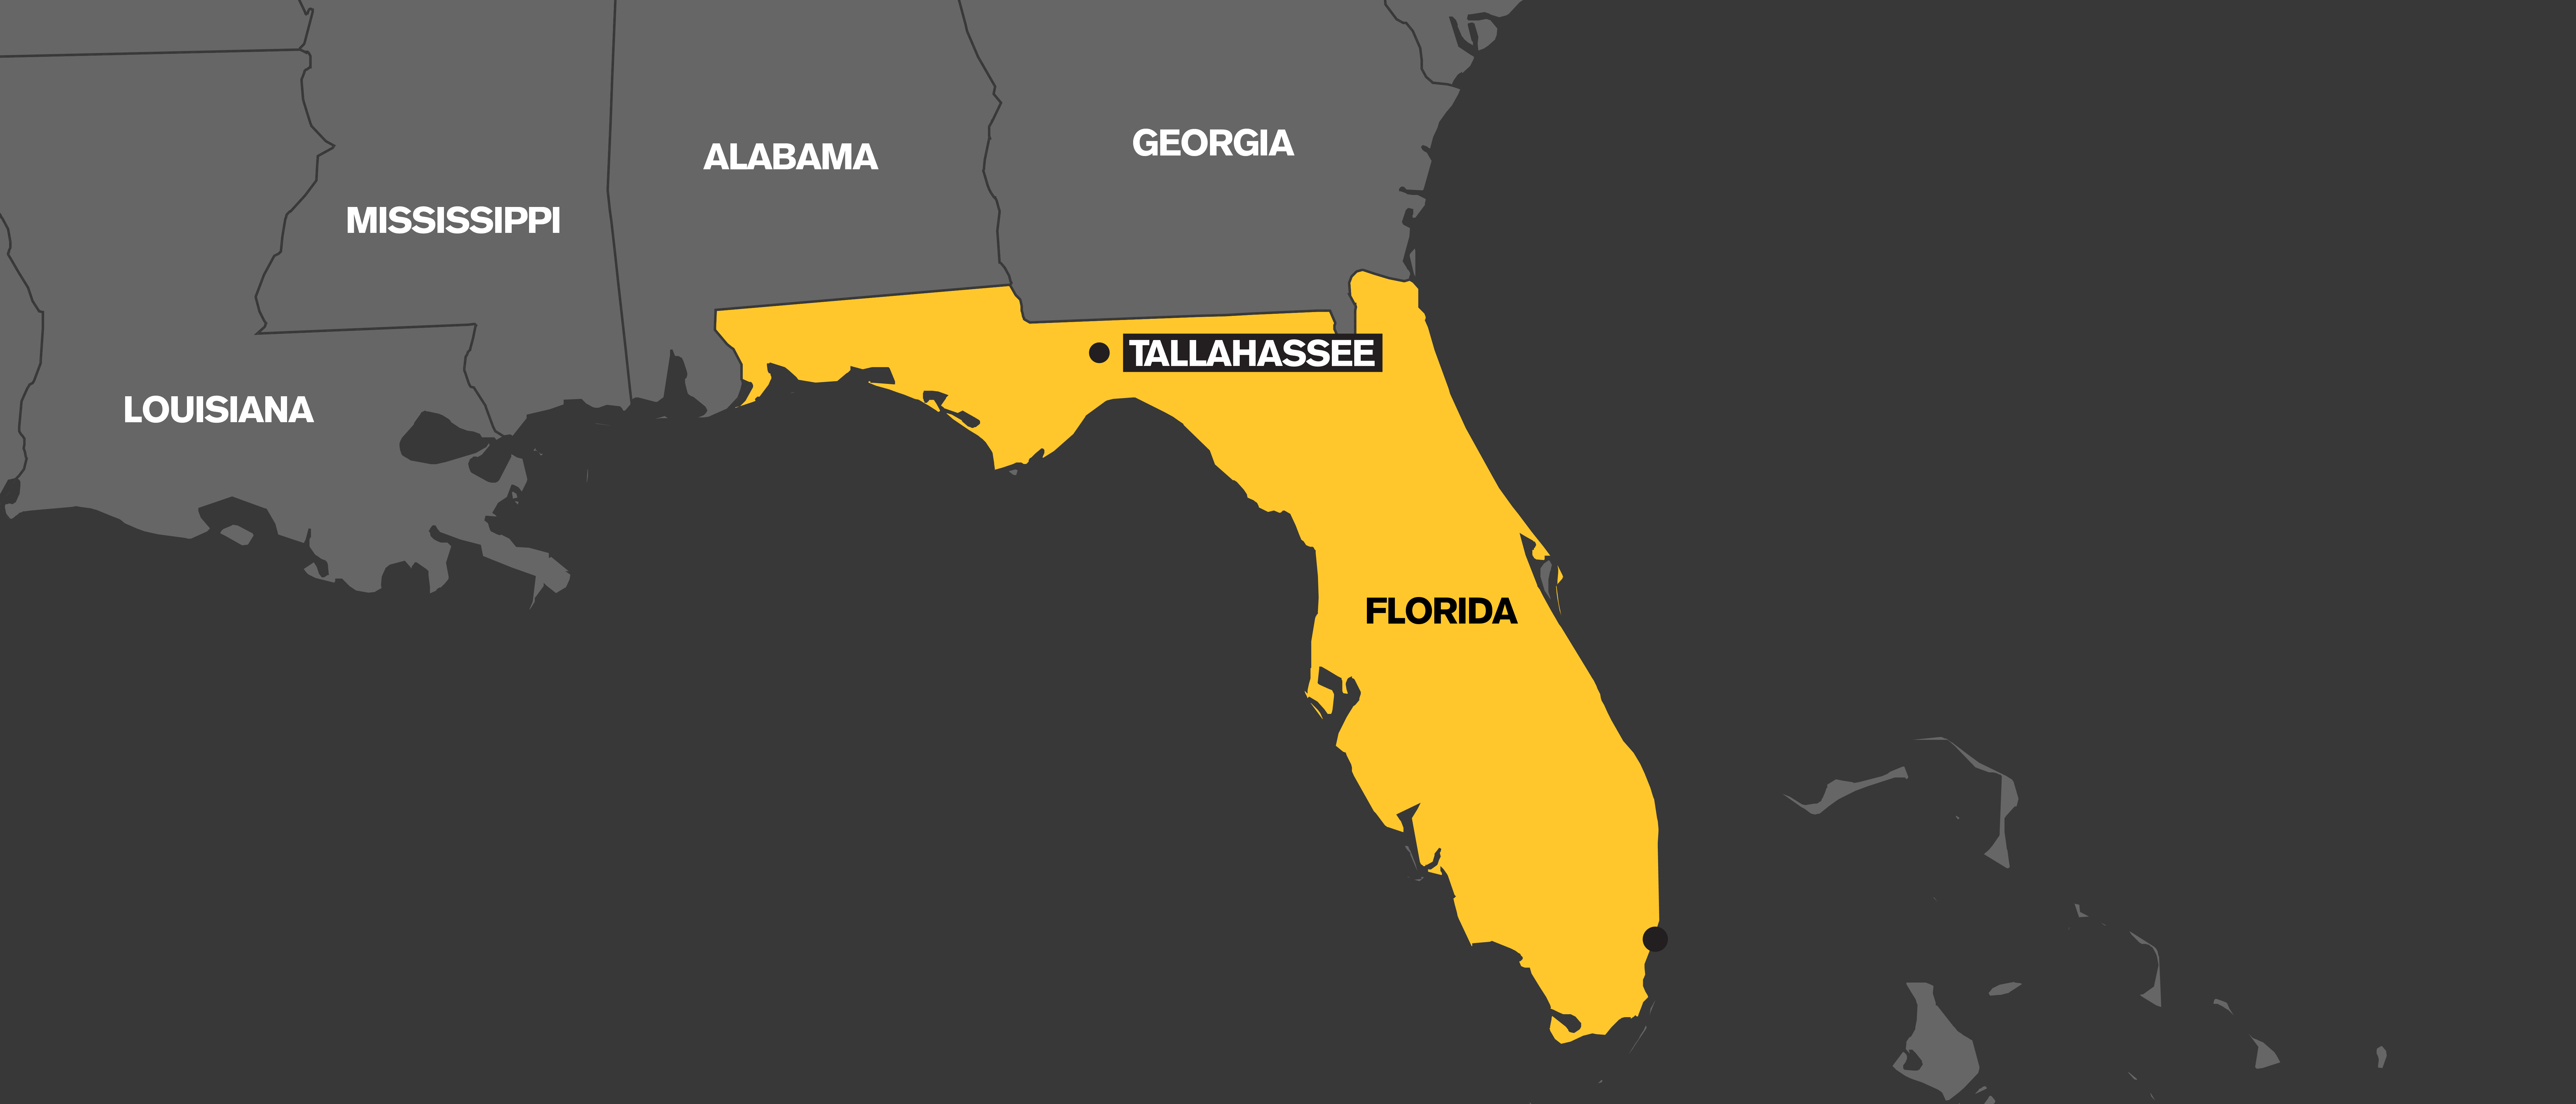 A map which highlights the state of Florida in yellow.